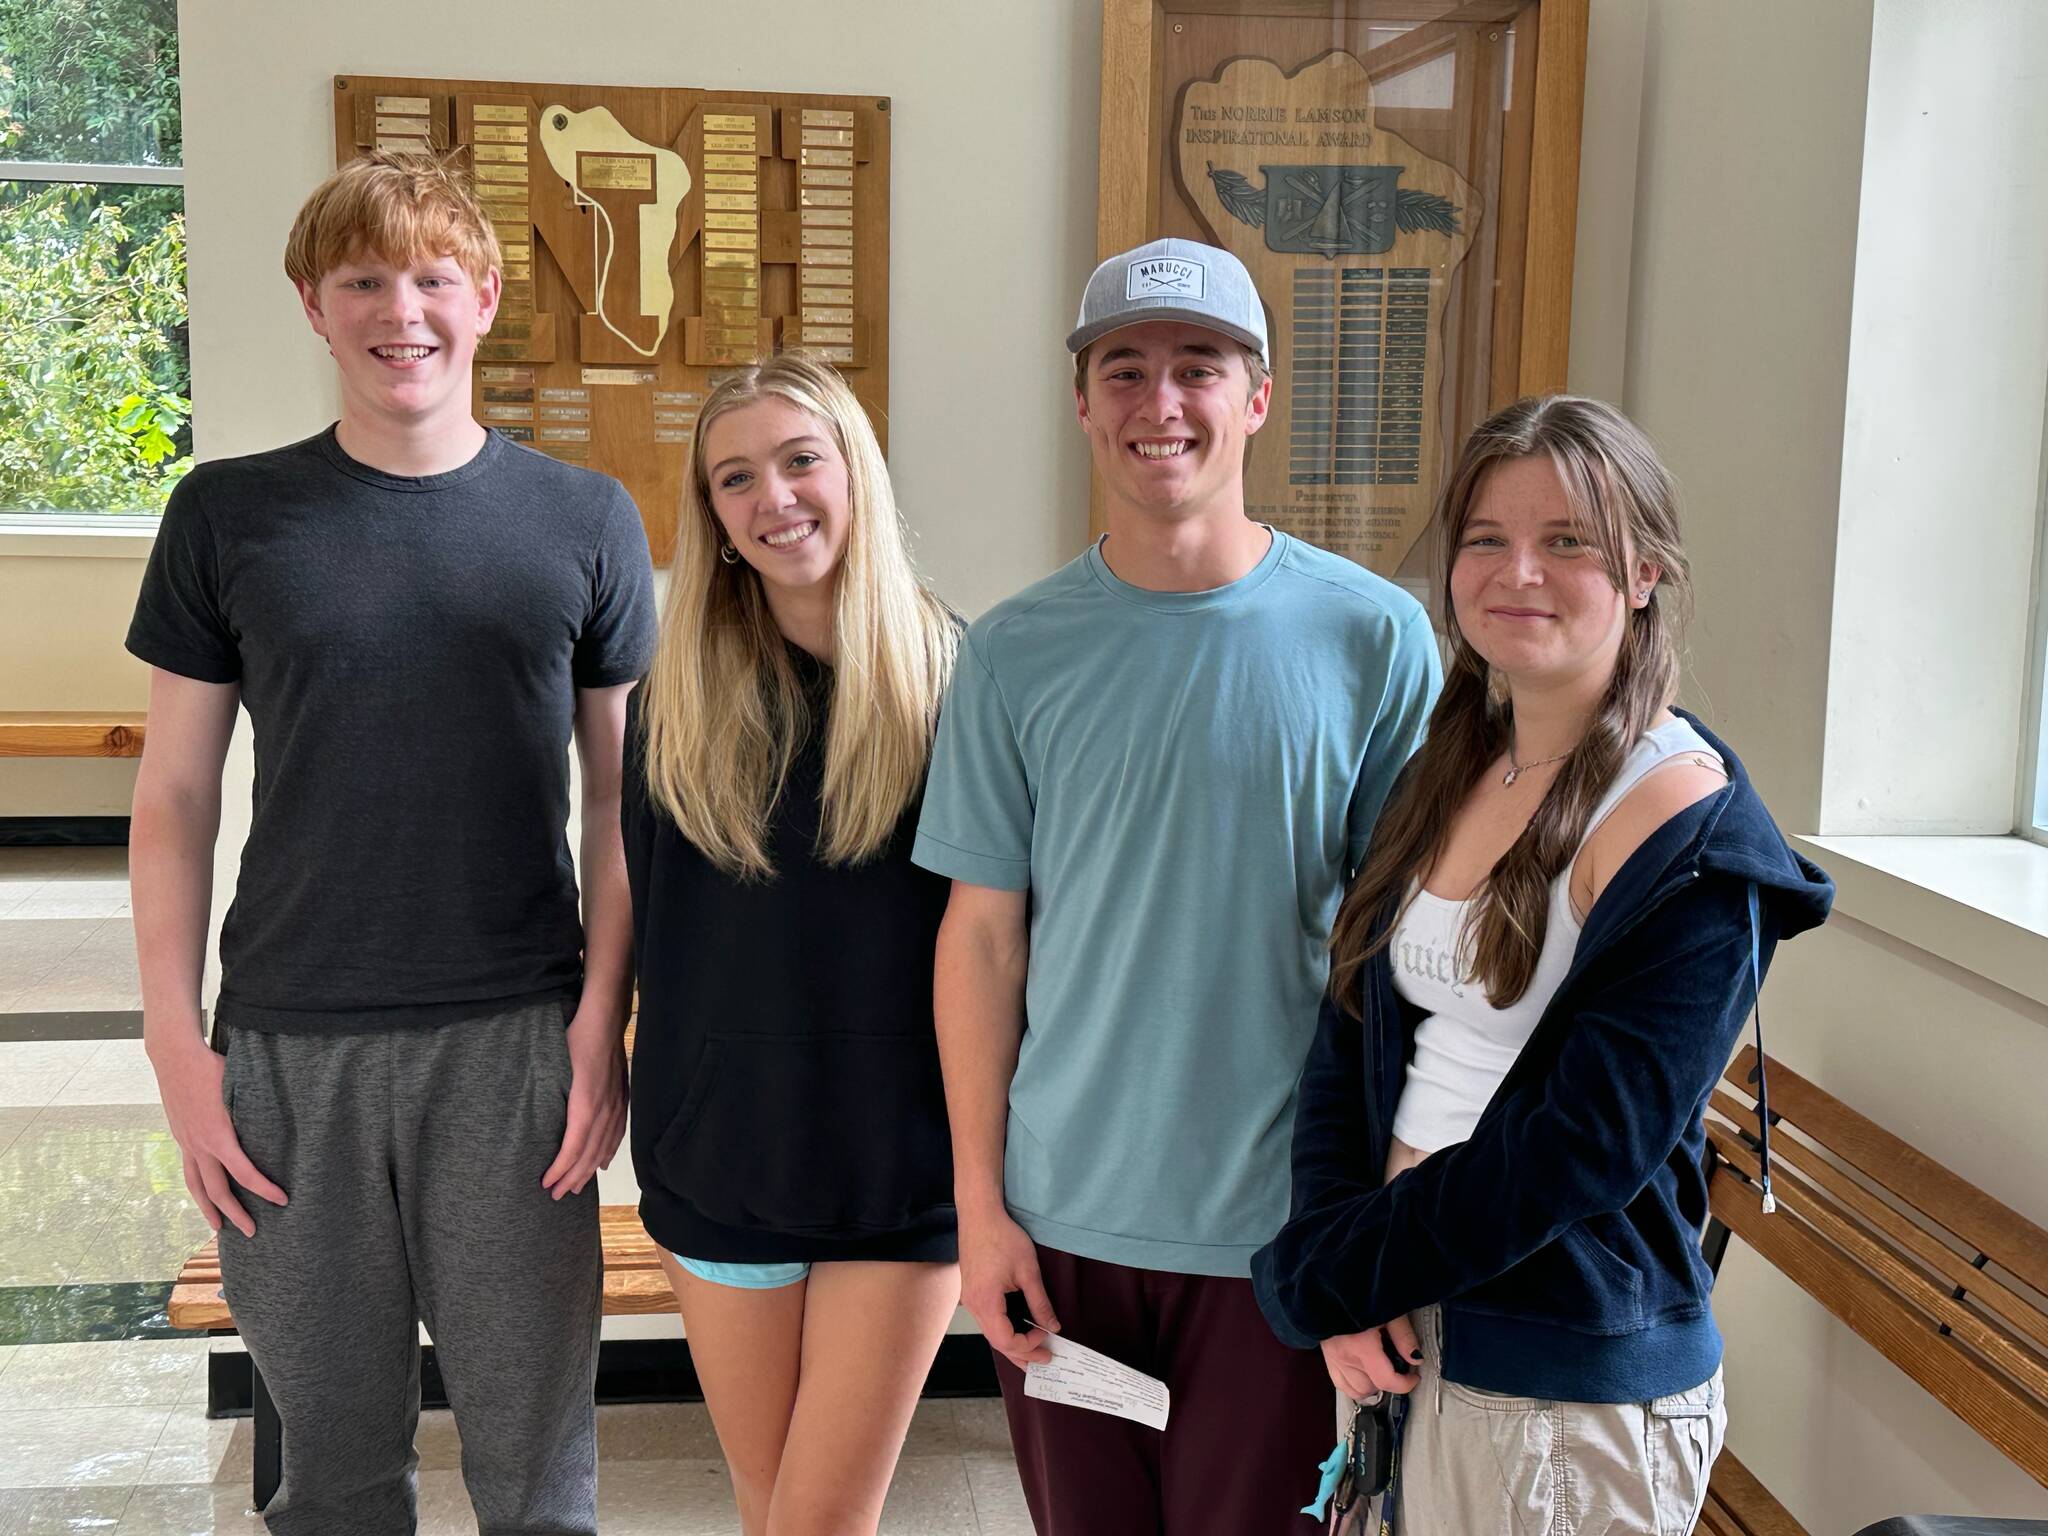 Left to right, Wesley Stokke, Hadley Holtzclaw, Maxwell Viafore and Hannah Moeller. Photo courtesy of the Mercer Island School District